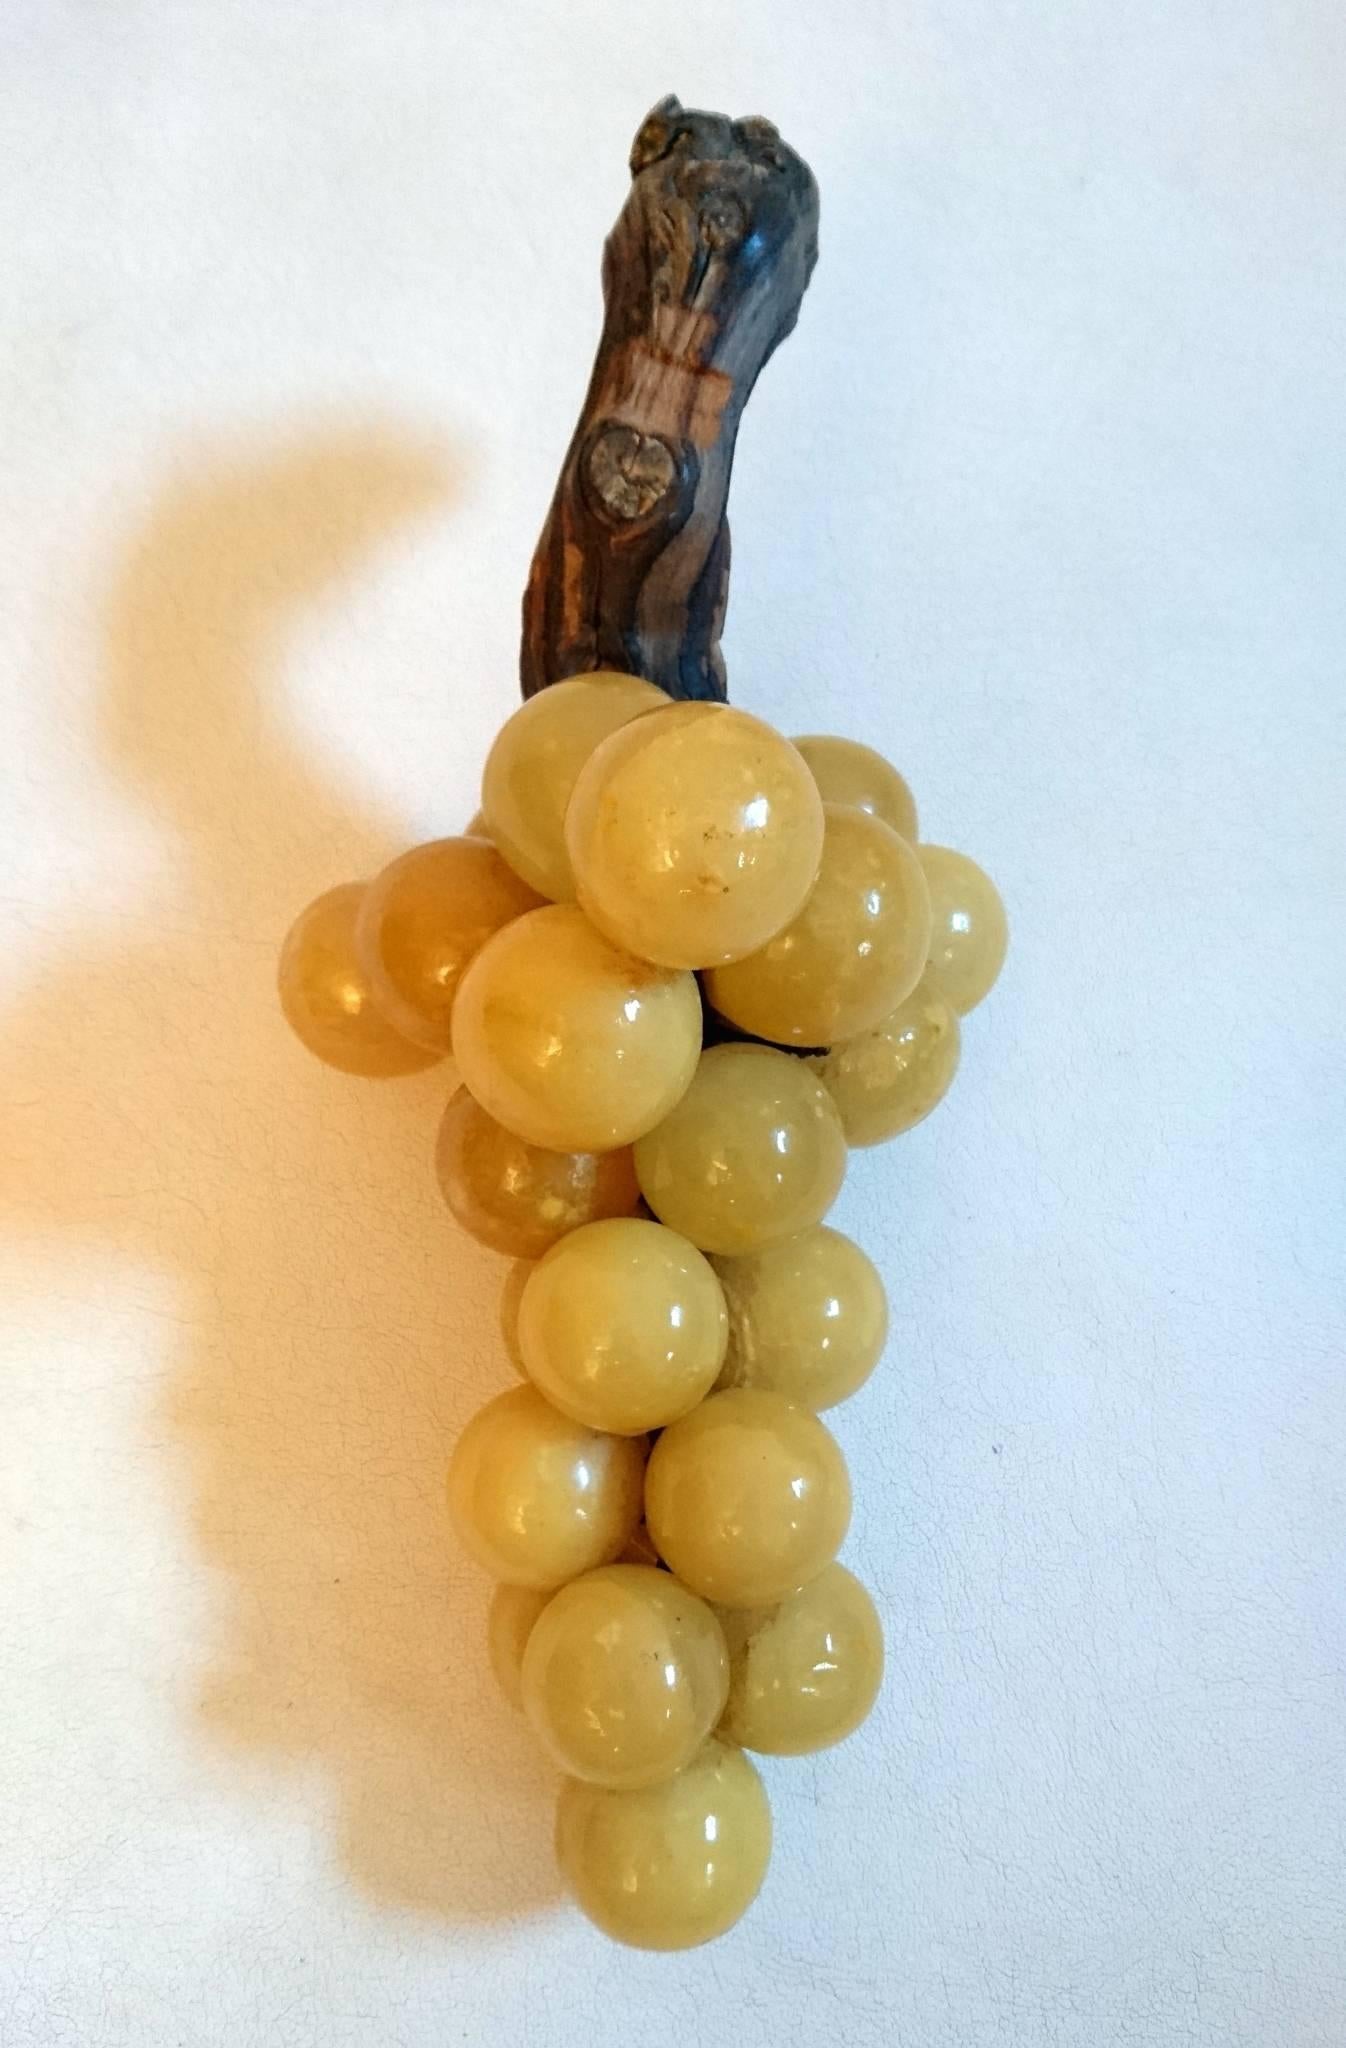 A cluster of alabaster grapes on a piece of authentic vine wood. The grapes have a yellow color tone, giving them a realistic appearance.